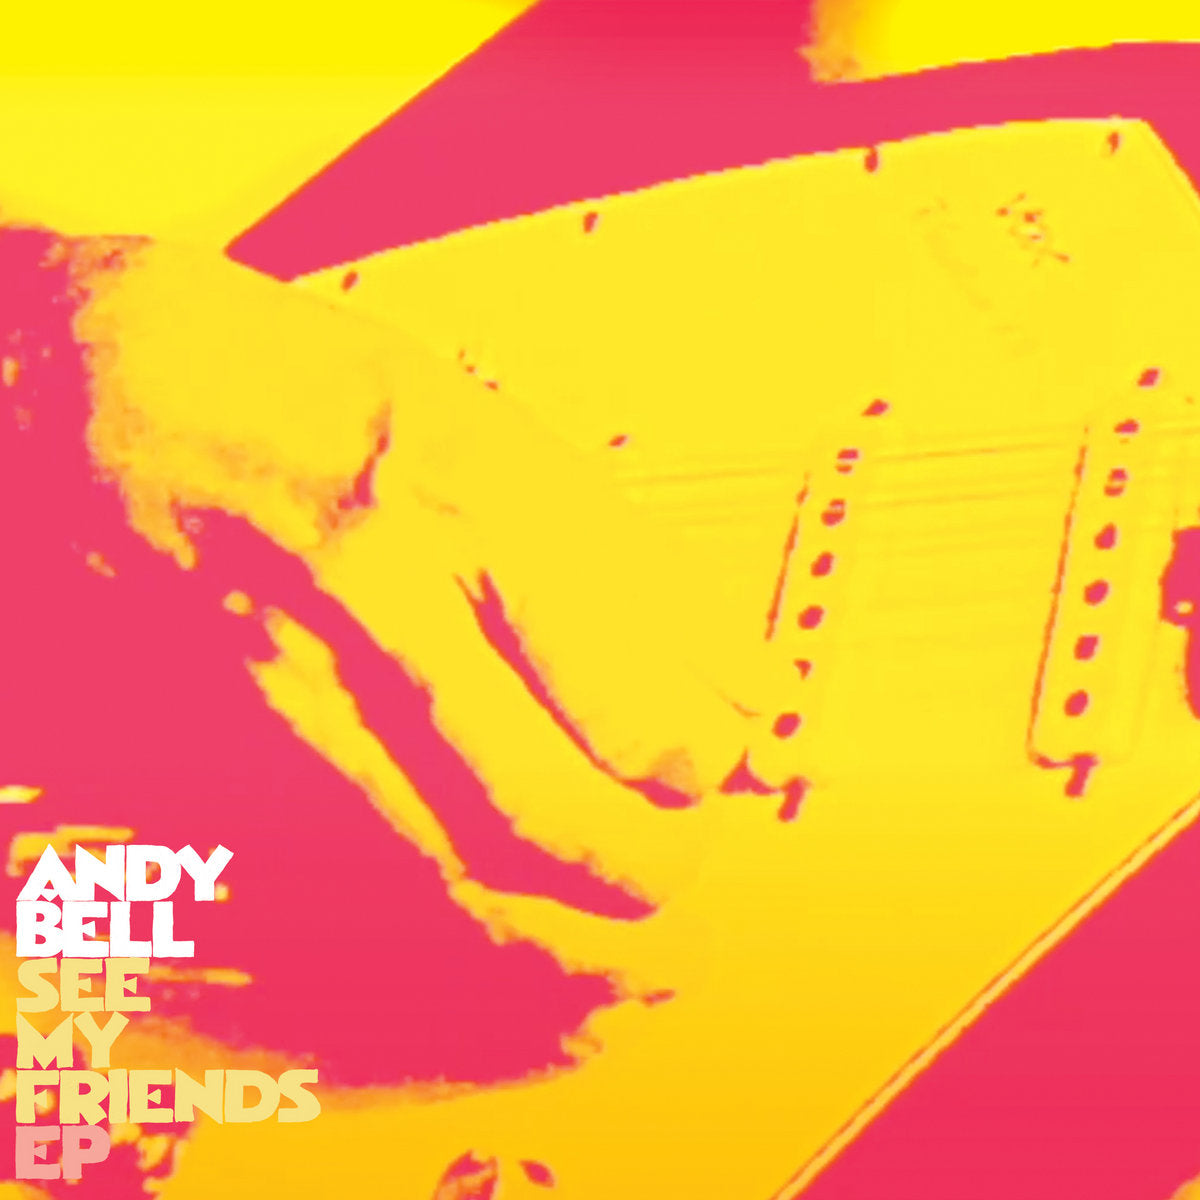 ANDY BELL - See My Friends EP - 10" - Vinyl